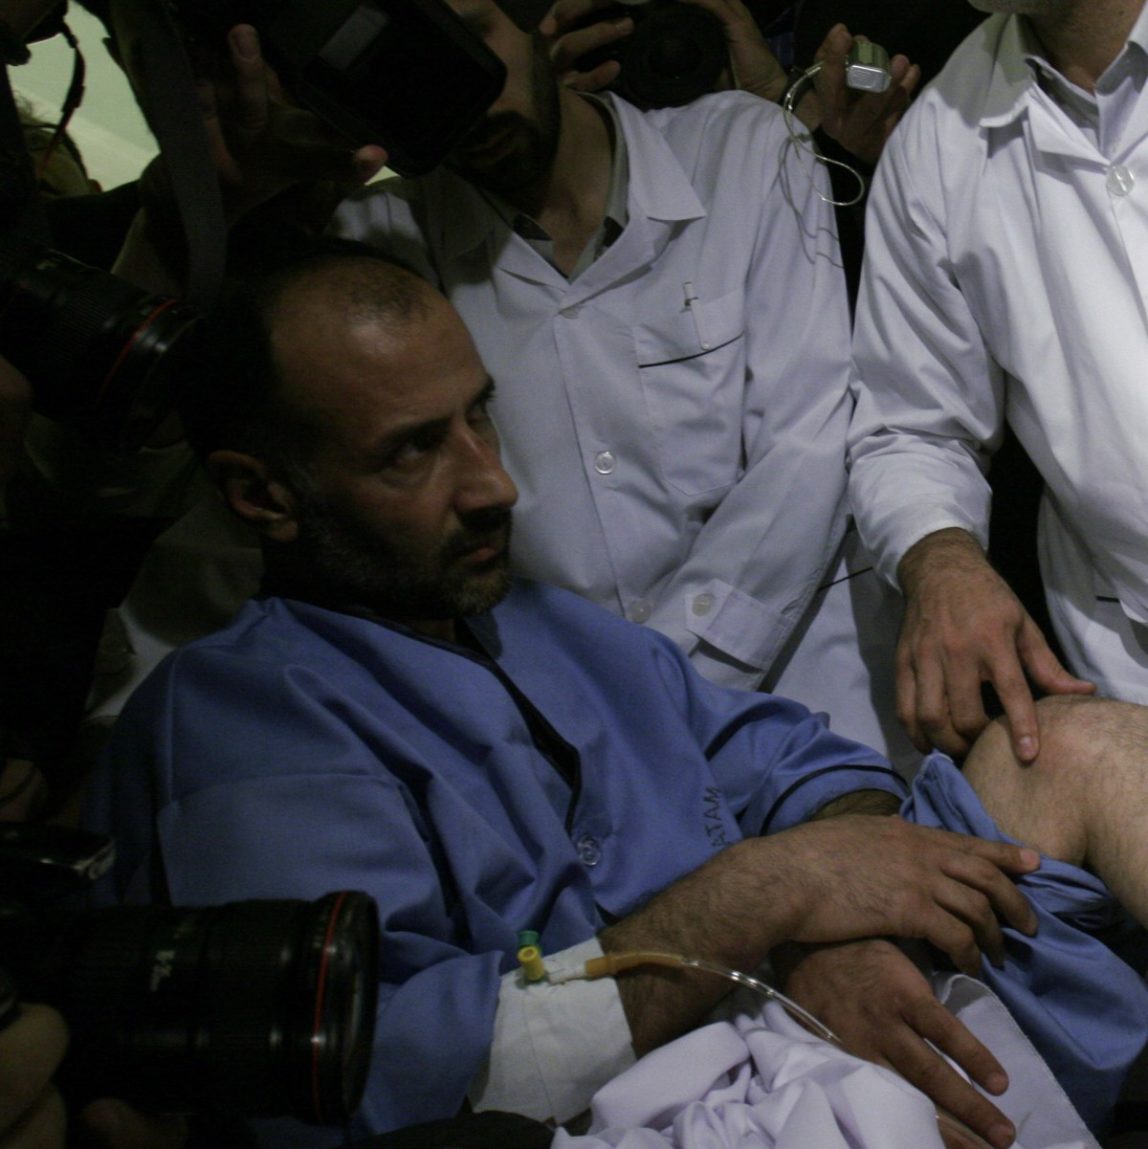 Iranian dermatologist Ali Hosseini, shows the foot of Iranian diplomat Jalal Sharafi, during a news conference at Iran's Foreign Ministry in Tehran, Iran Wednesday, April. 11, 2007. The Iranian diplomat has accused the CIA of torturing him during his detention in Iraq. Claims of torture have not been independently verified. (AP Photo/Hasan Sarbakhshian)